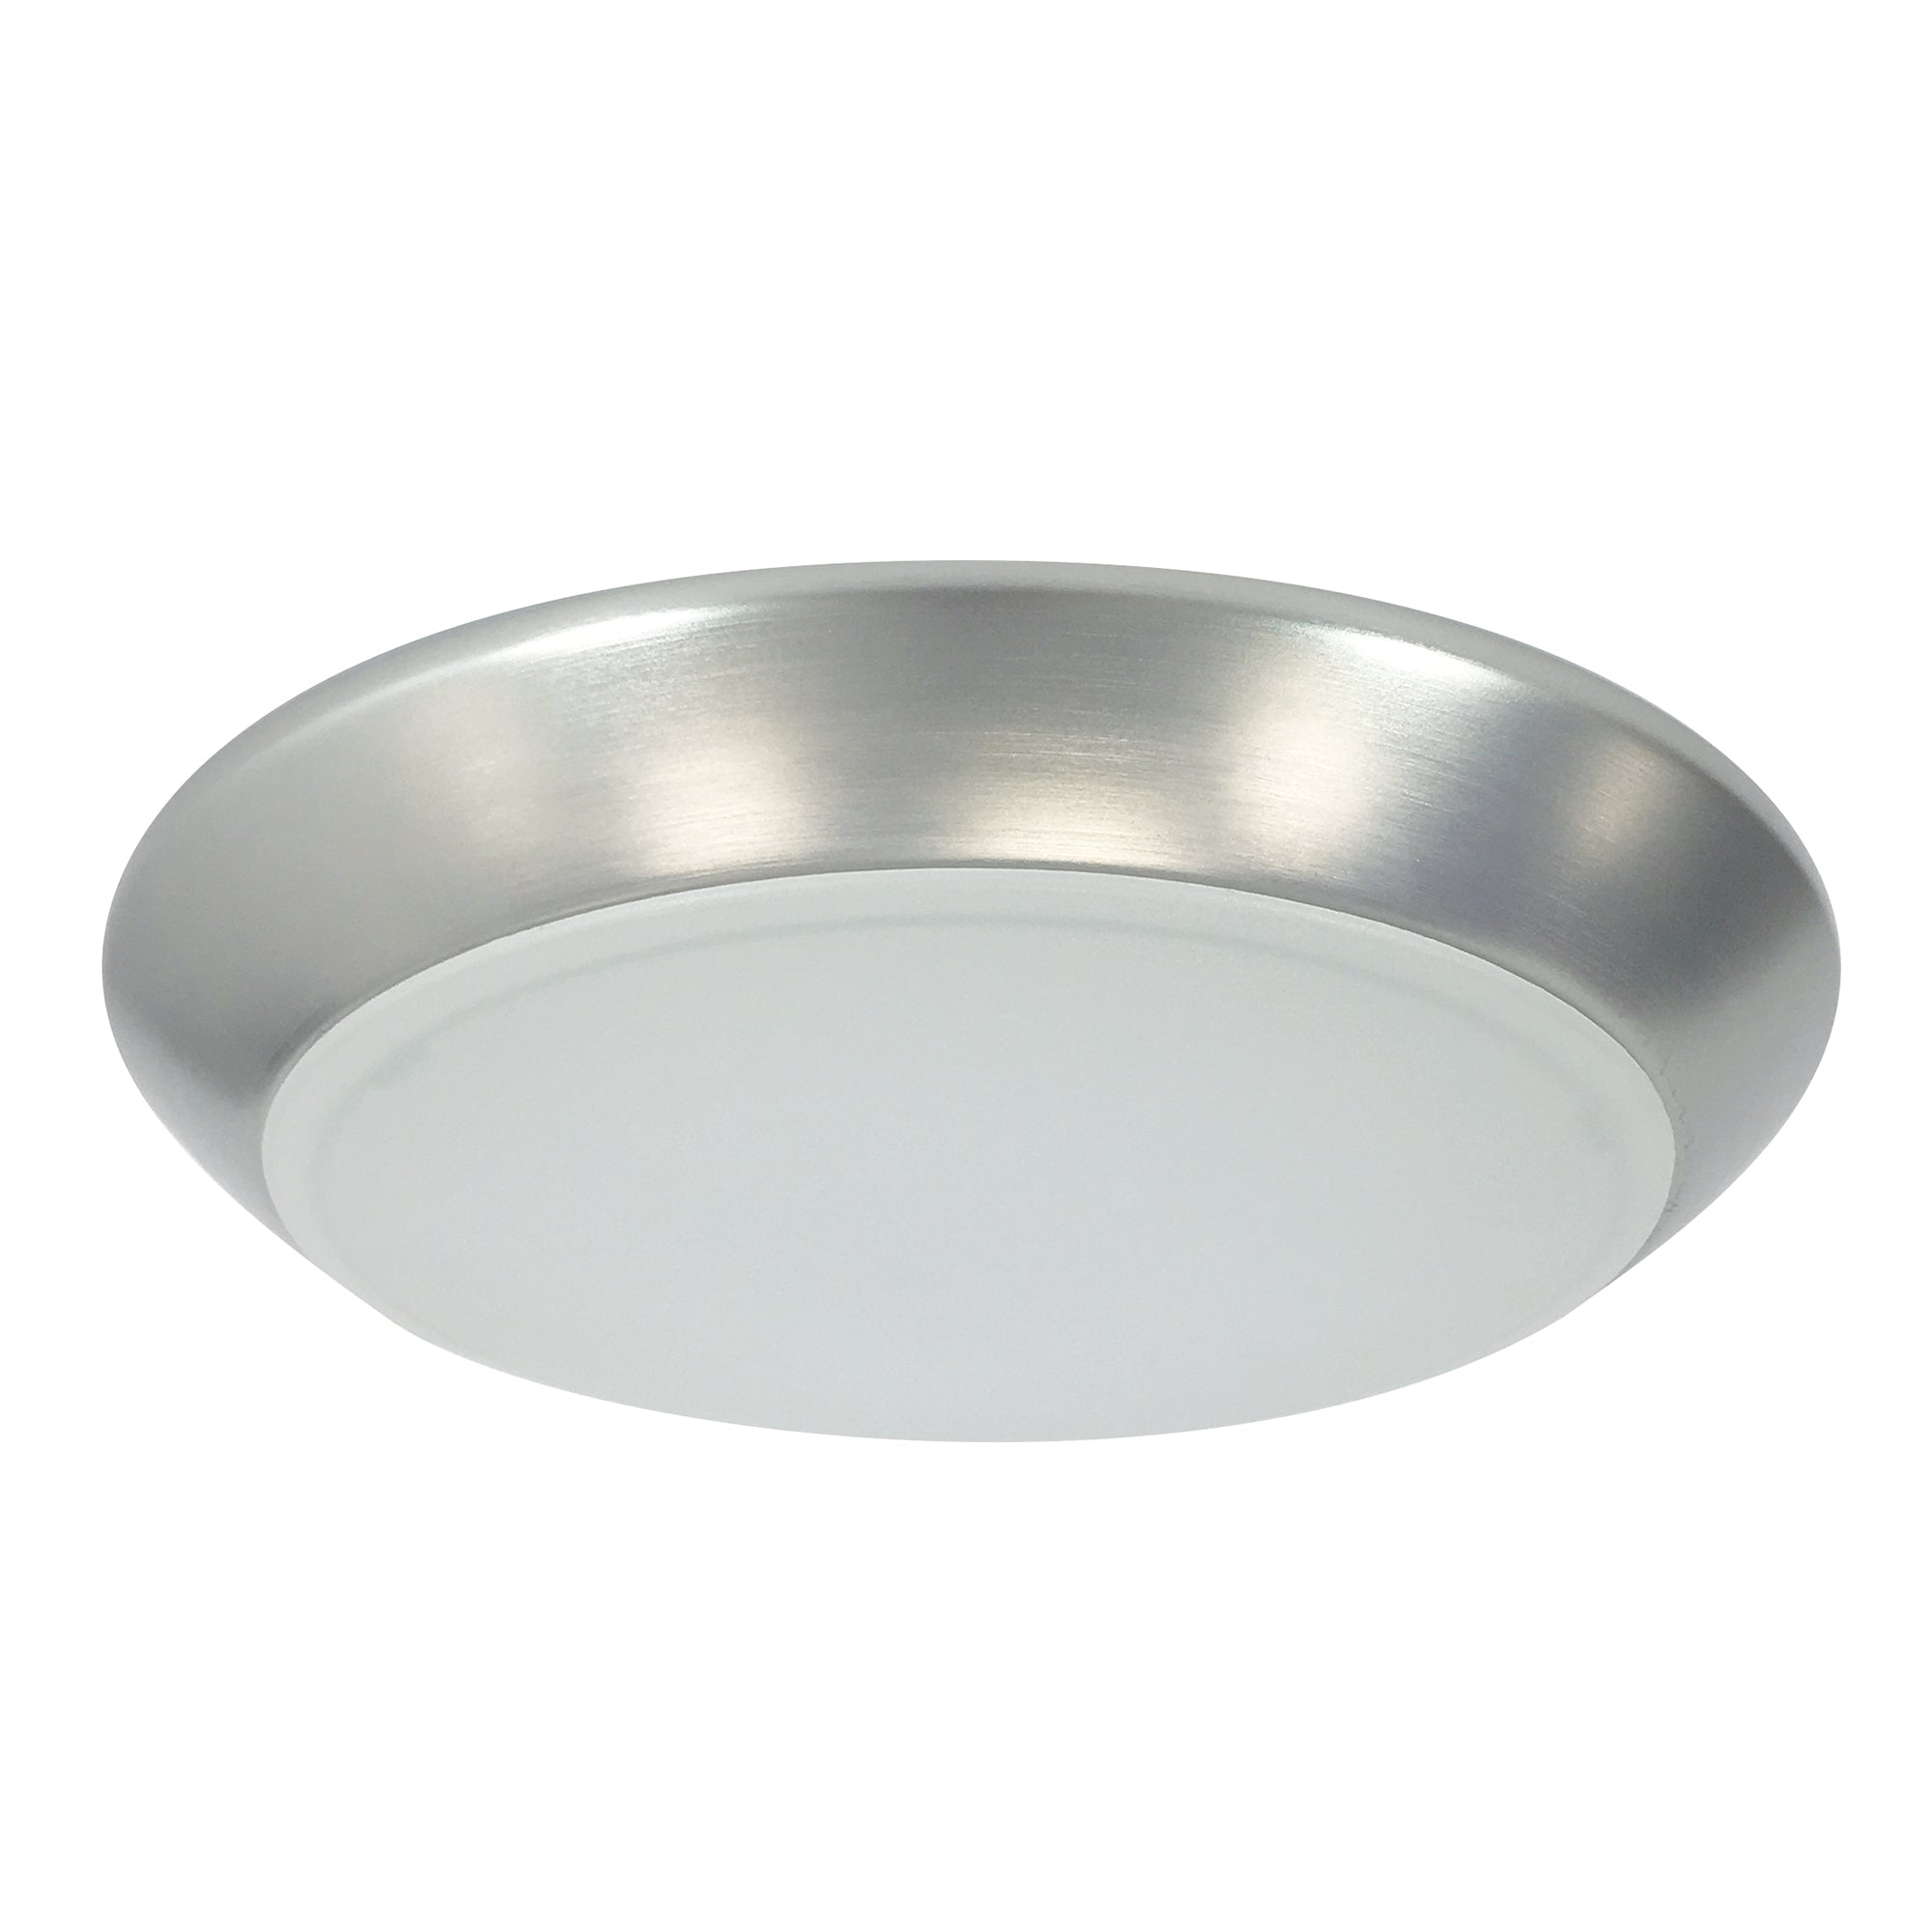 Nora Lighting NLOPAC-R8T2450NM - Surface - 8 Inch AC Opal LED Surface Mount, 2150lm / 32W, 5000K, Natural Metal finish